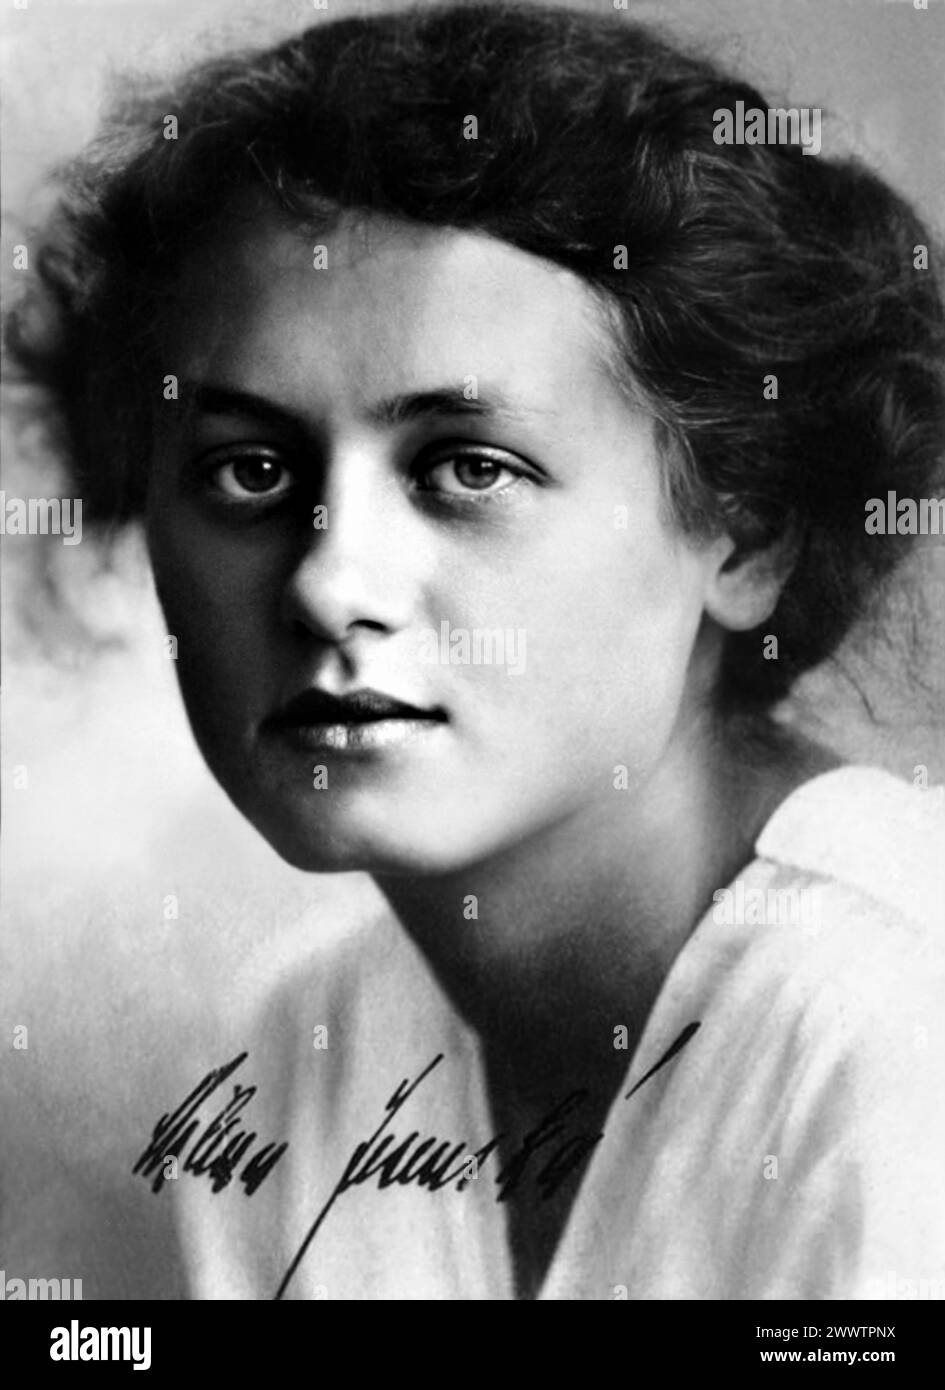 1915 c., Praha , Czechia , Austria-Hungary : The Czech woman journalist, writer,  editor and translator MILENA JESENSKA ( Jesenská , 1896 - 1944 ). Close friend of celebrated boemian writer Franz KAFKA ( 1883 - 1924 ). In November 1939 she was arrested by the Gestapo .  In October 1940 she was deported to a concentration camp in Ravensbrück in Germany where died of kidney failure  on 17 May 1944 . Unknown photographer . - Jesenský  - SCRITTORE - LETTERATO - LETTERATURA - LITERATURE - HISTORY - FOTO STORICHE - DONNA SCRITTRICE - GIORNALISTA - GIORNALISMO - JOURNALIST - JOURNALISM - TRADUTTORE - Stock Photo